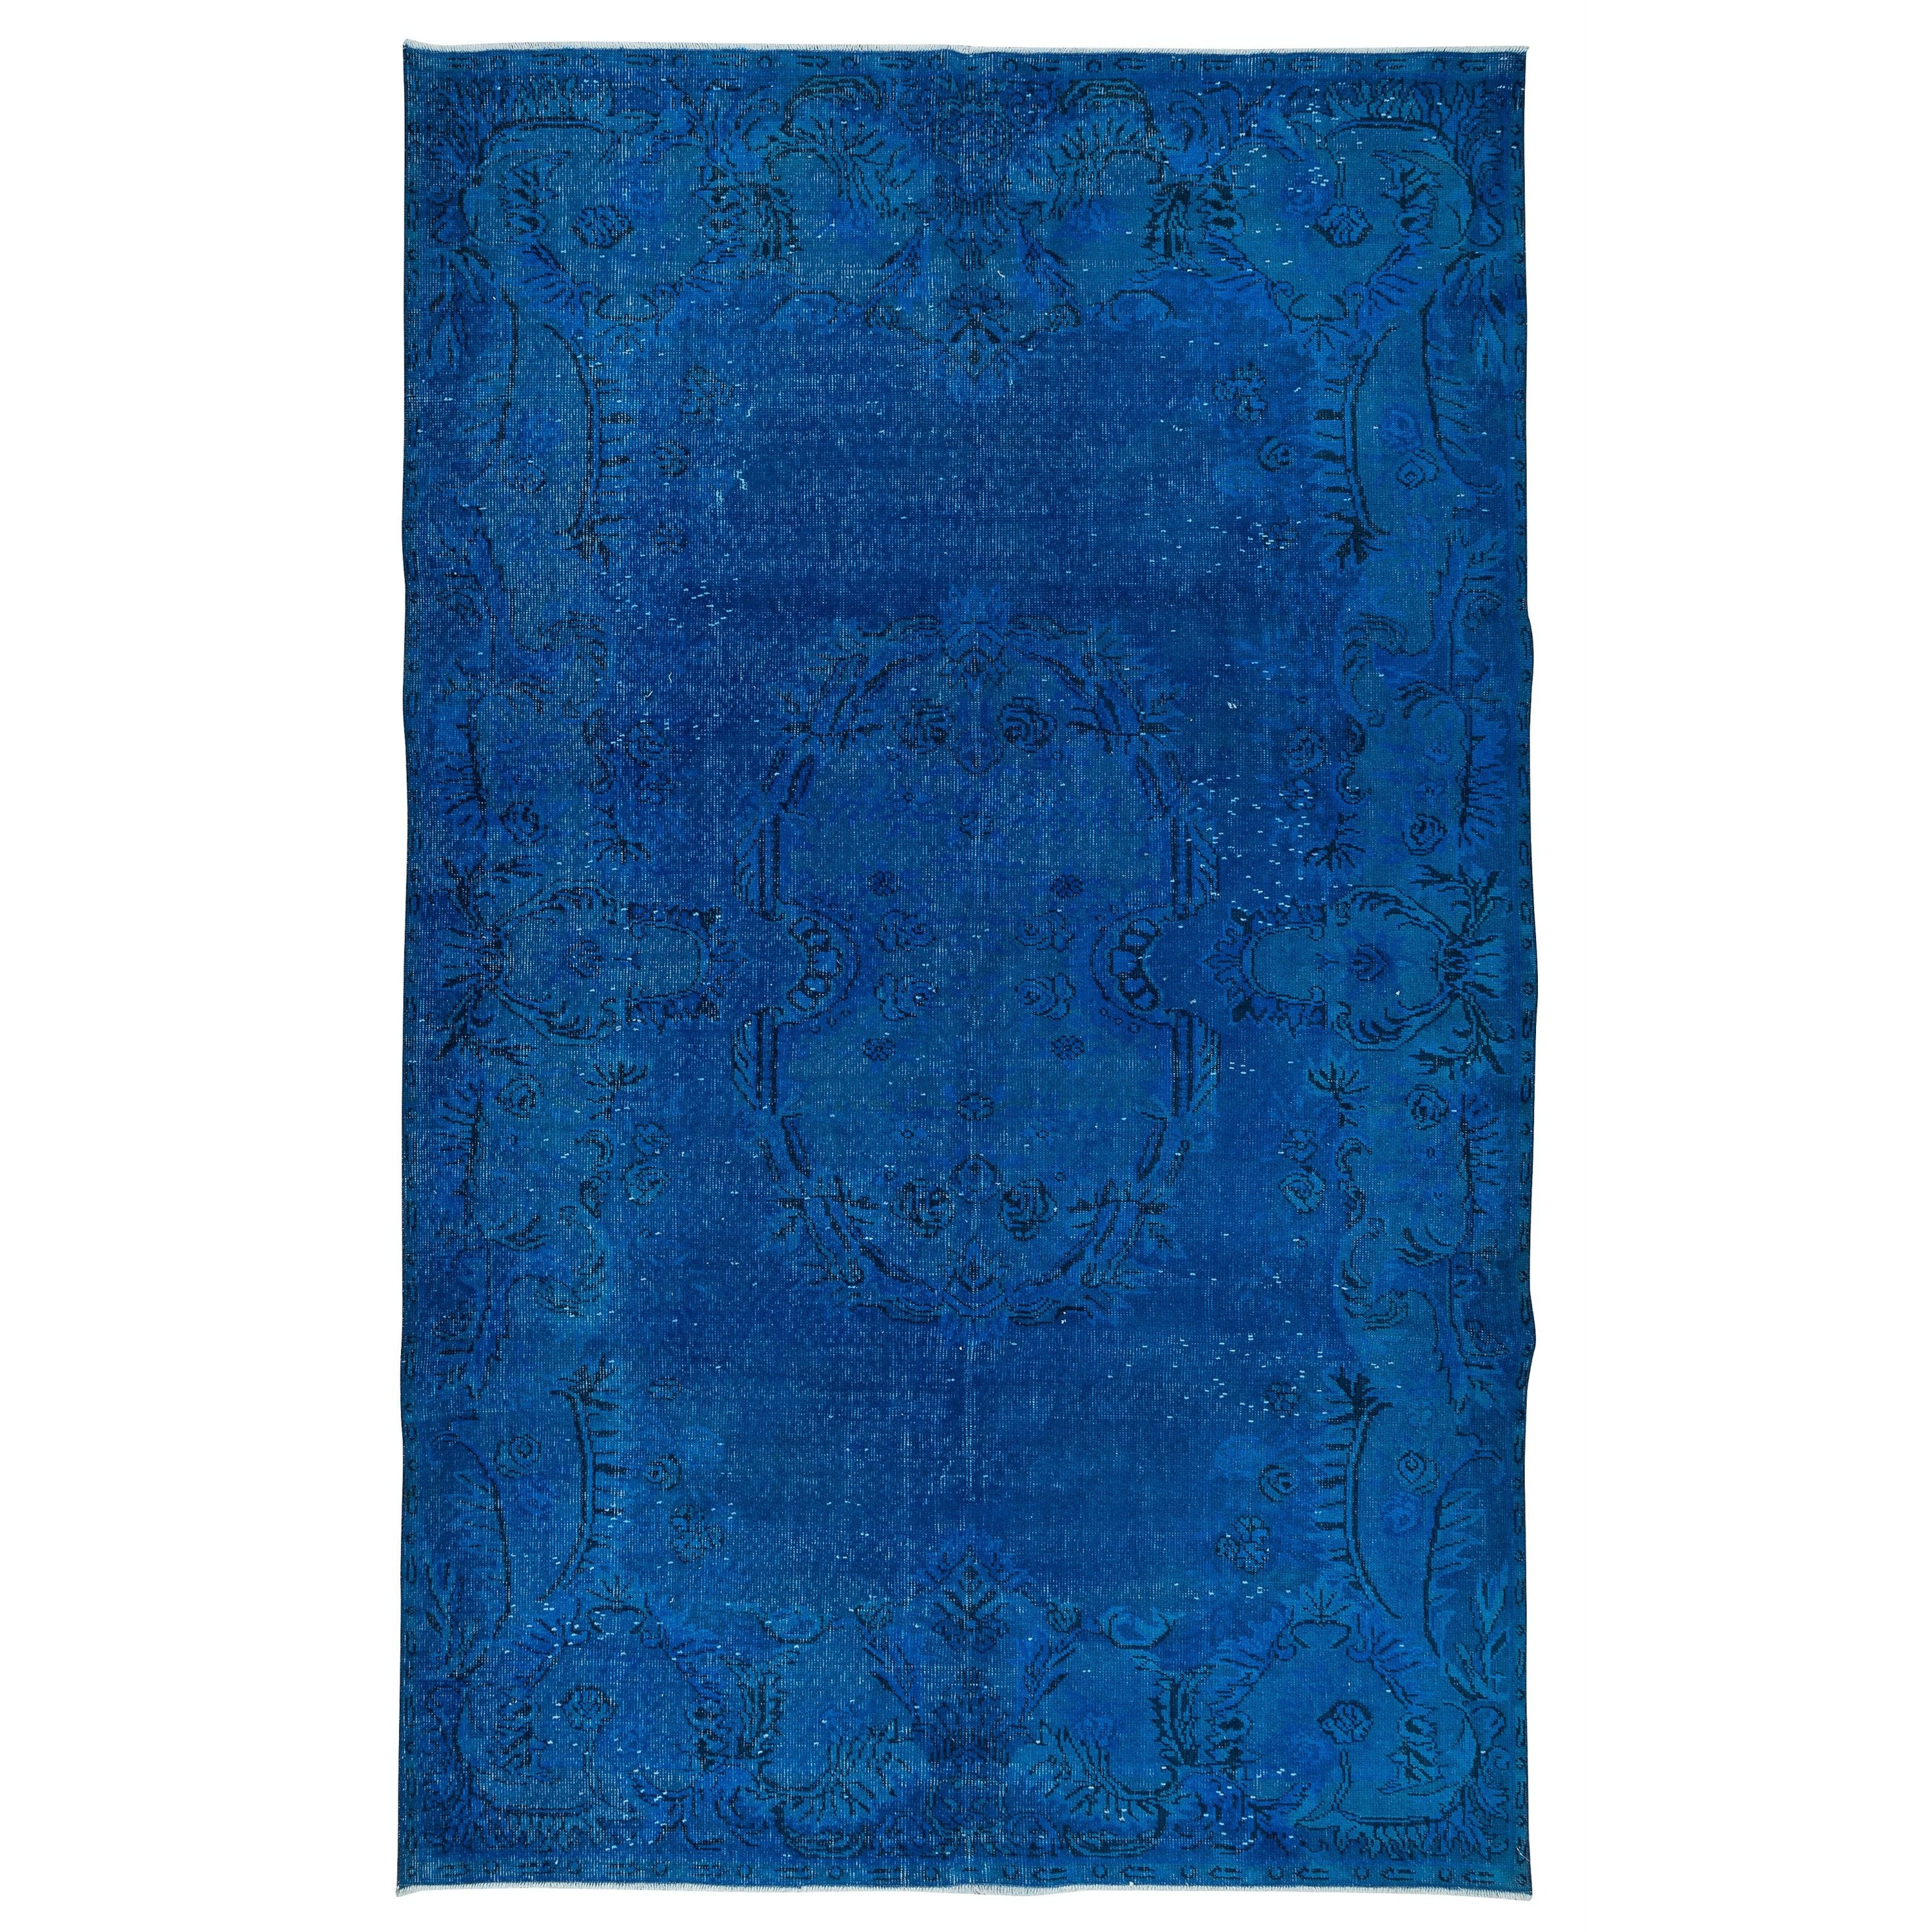 6.2x10 Ft French Aubusson Inspired Modern Indigo Blue Rug, Handknotted in Turkey For Sale